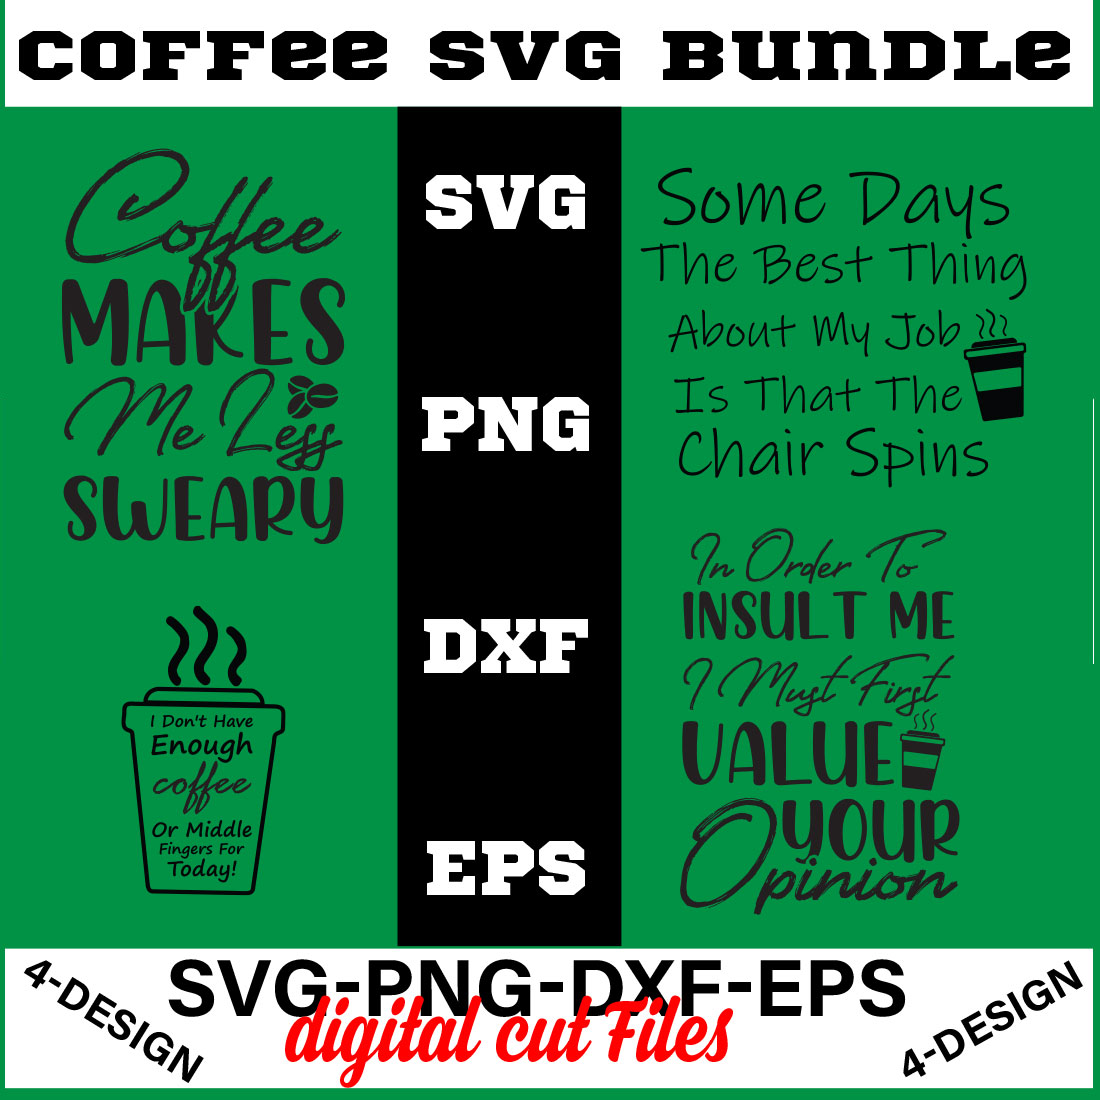 Coffee SVG Bundle, Funny Coffee SVG, Coffee Quote Svg, Caffeine Queen, Coffee Lovers, Coffee Obsessed Volume-8 cover image.